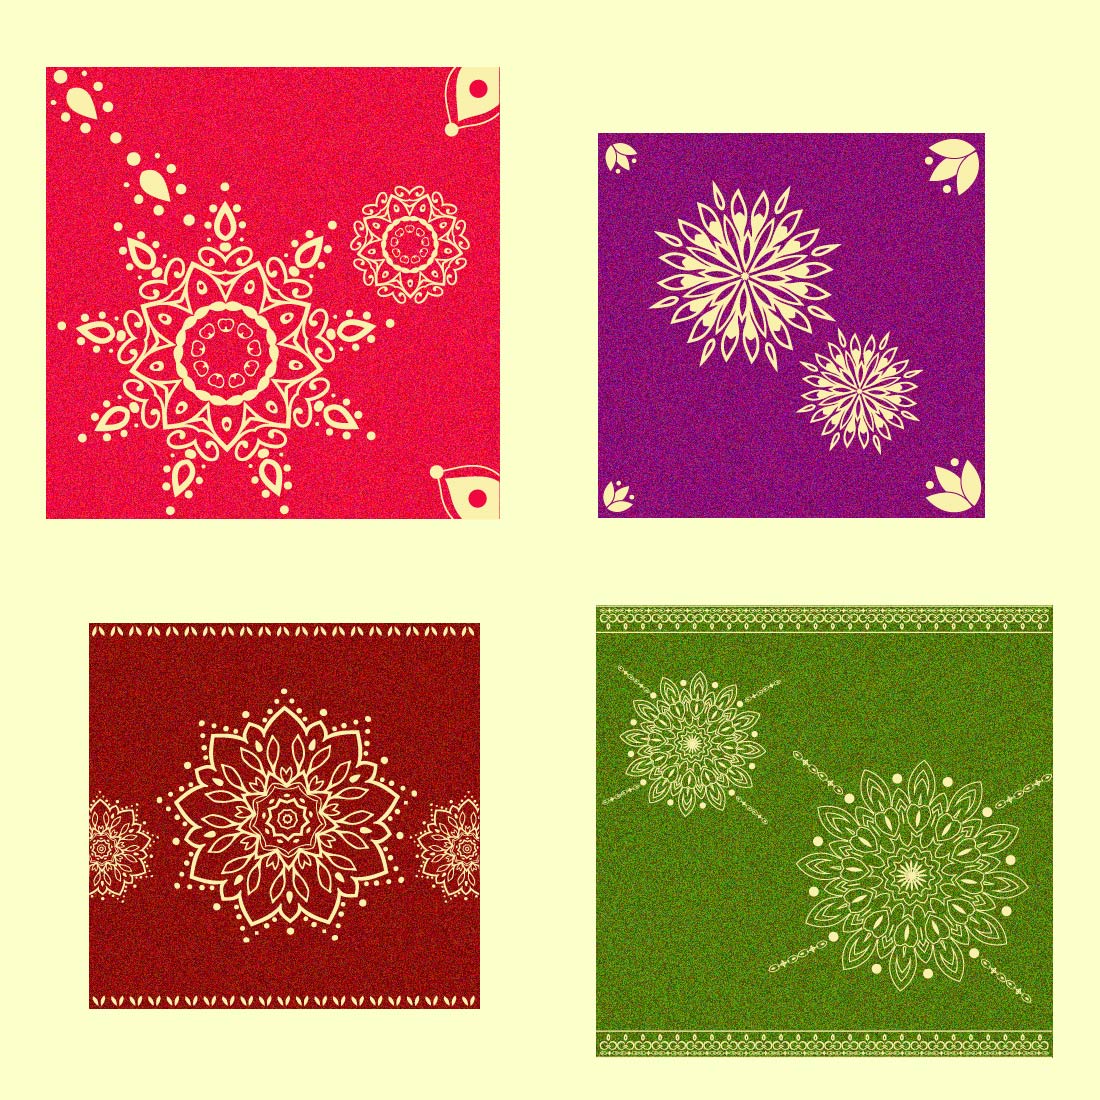 4 Background designs of mandala pattern preview image.